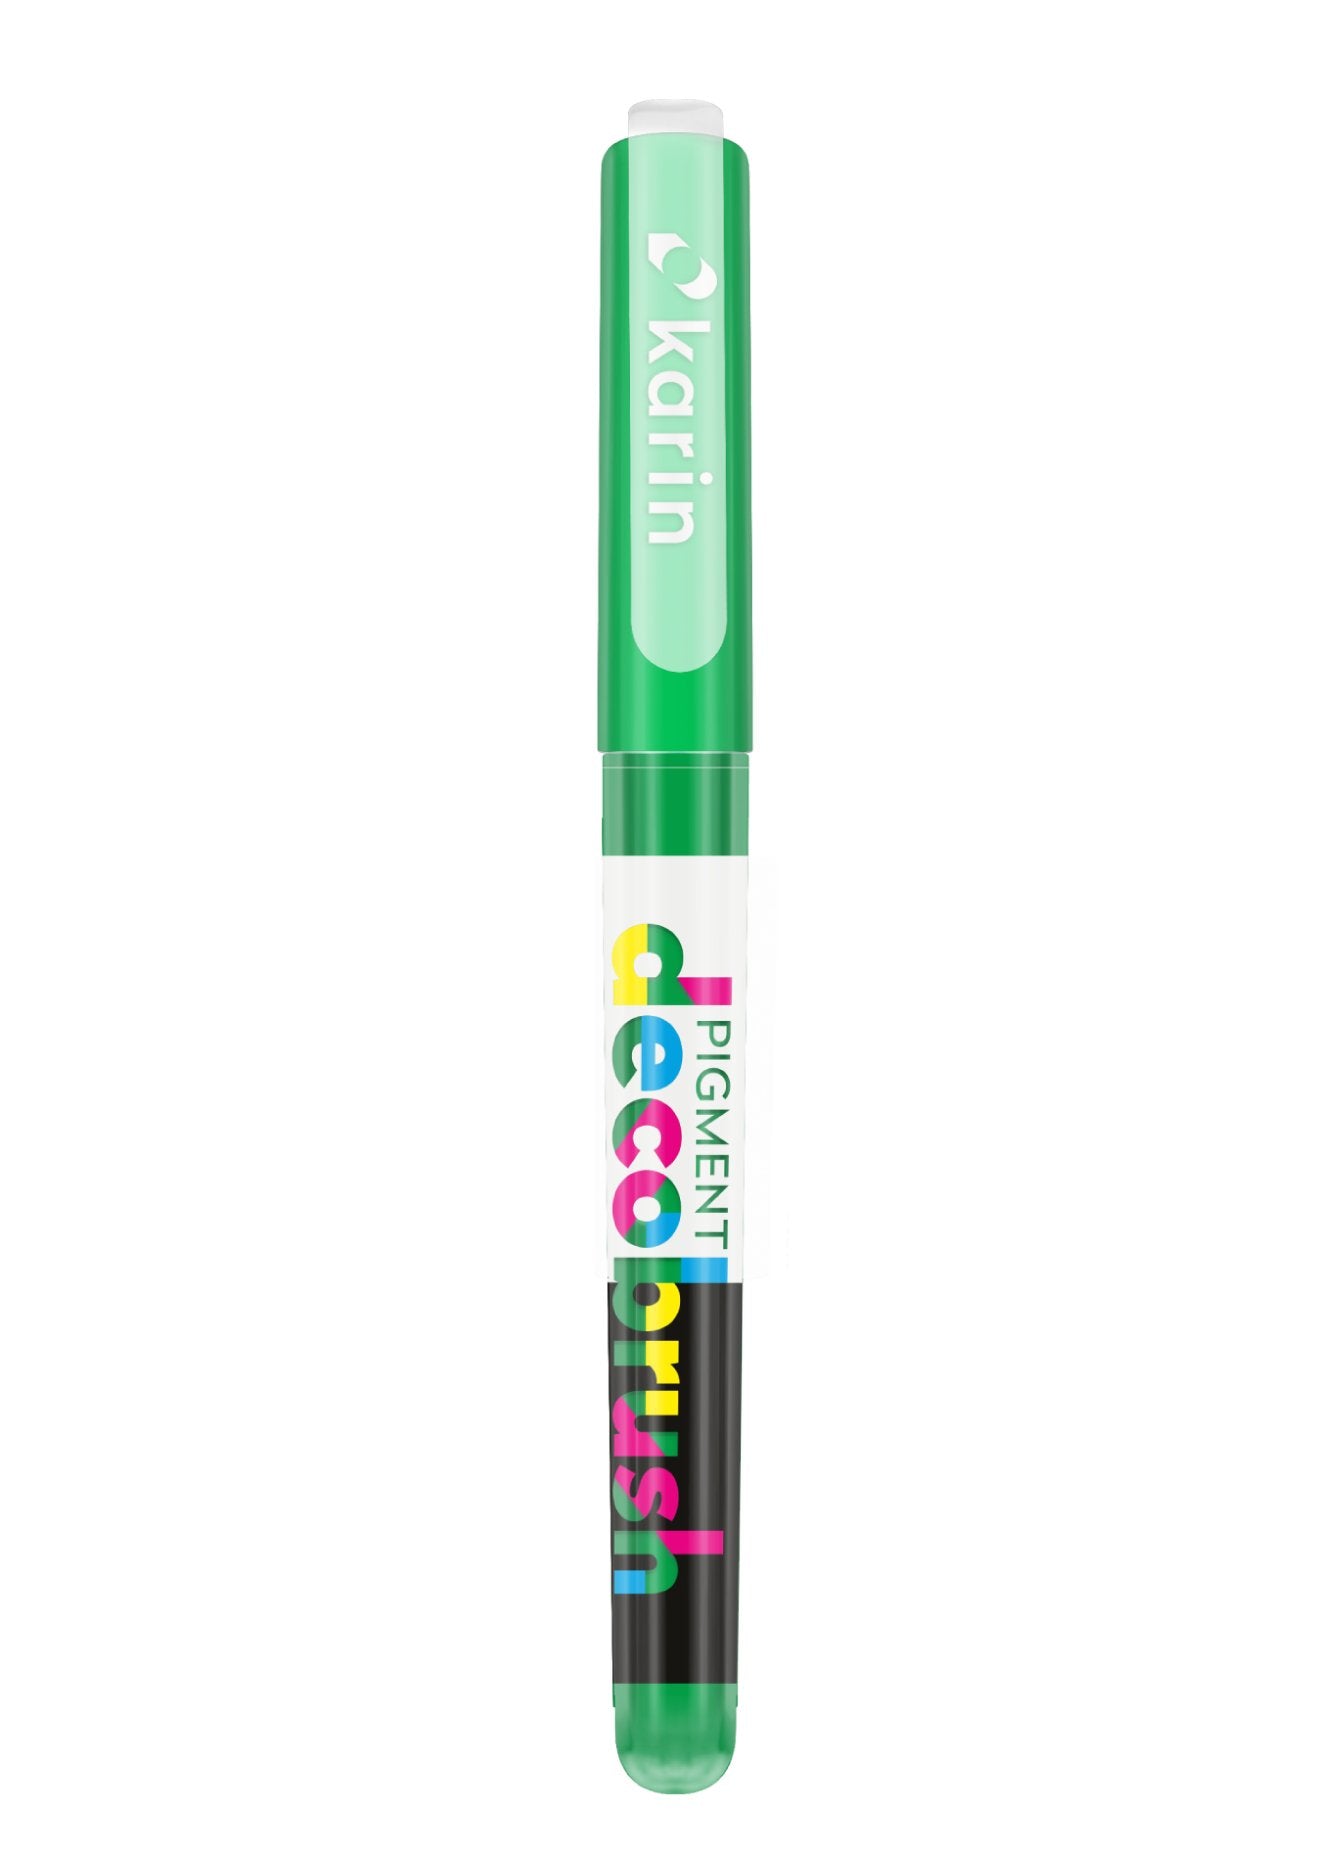 Feutres Karin Markers PIGMENT Décobrush - Karin Markers - GREEN 347U - millenotes